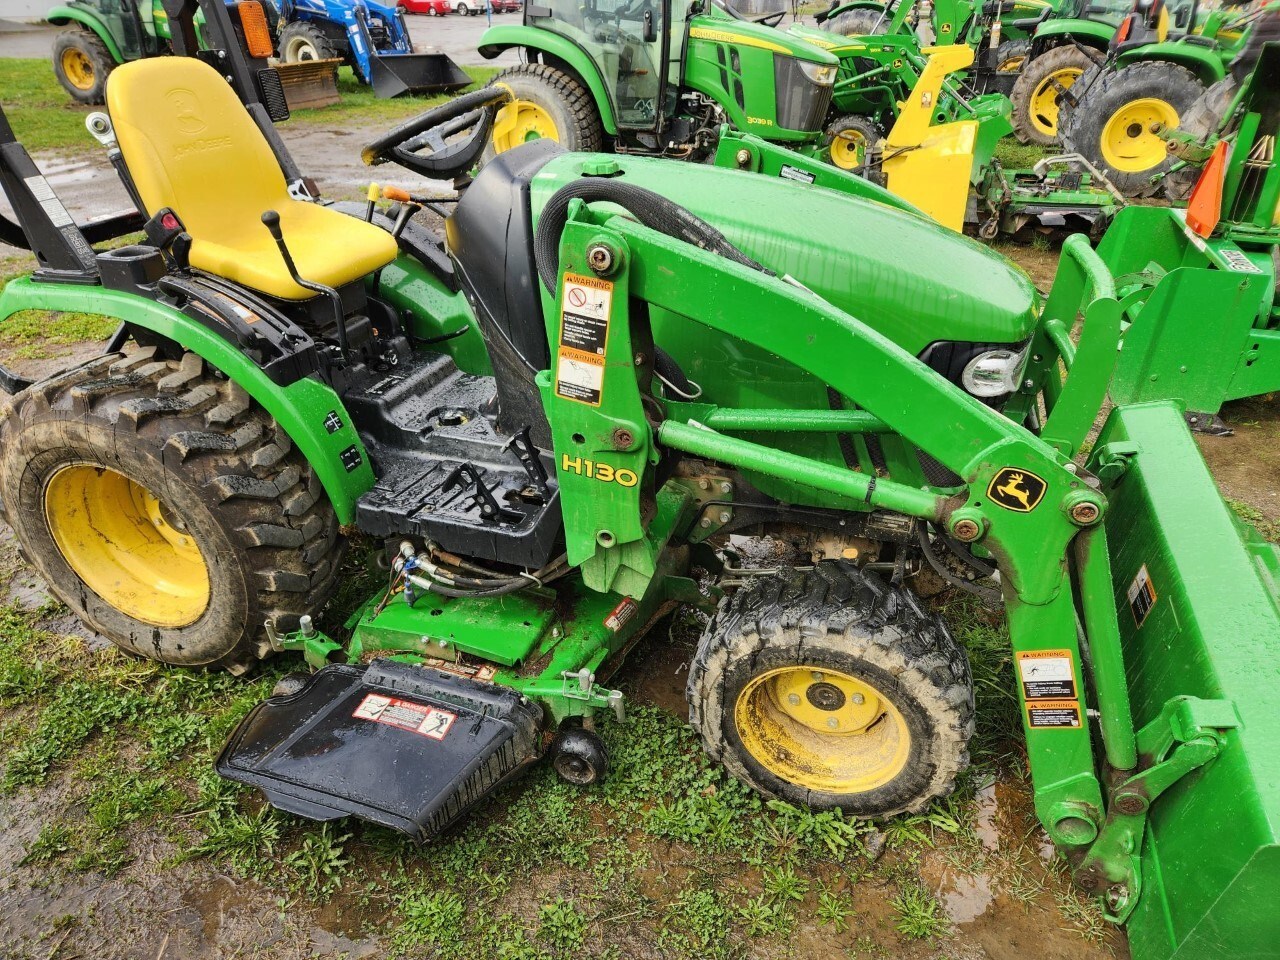 2015 John Deere 2025R Tractor - Compact Utility For Sale